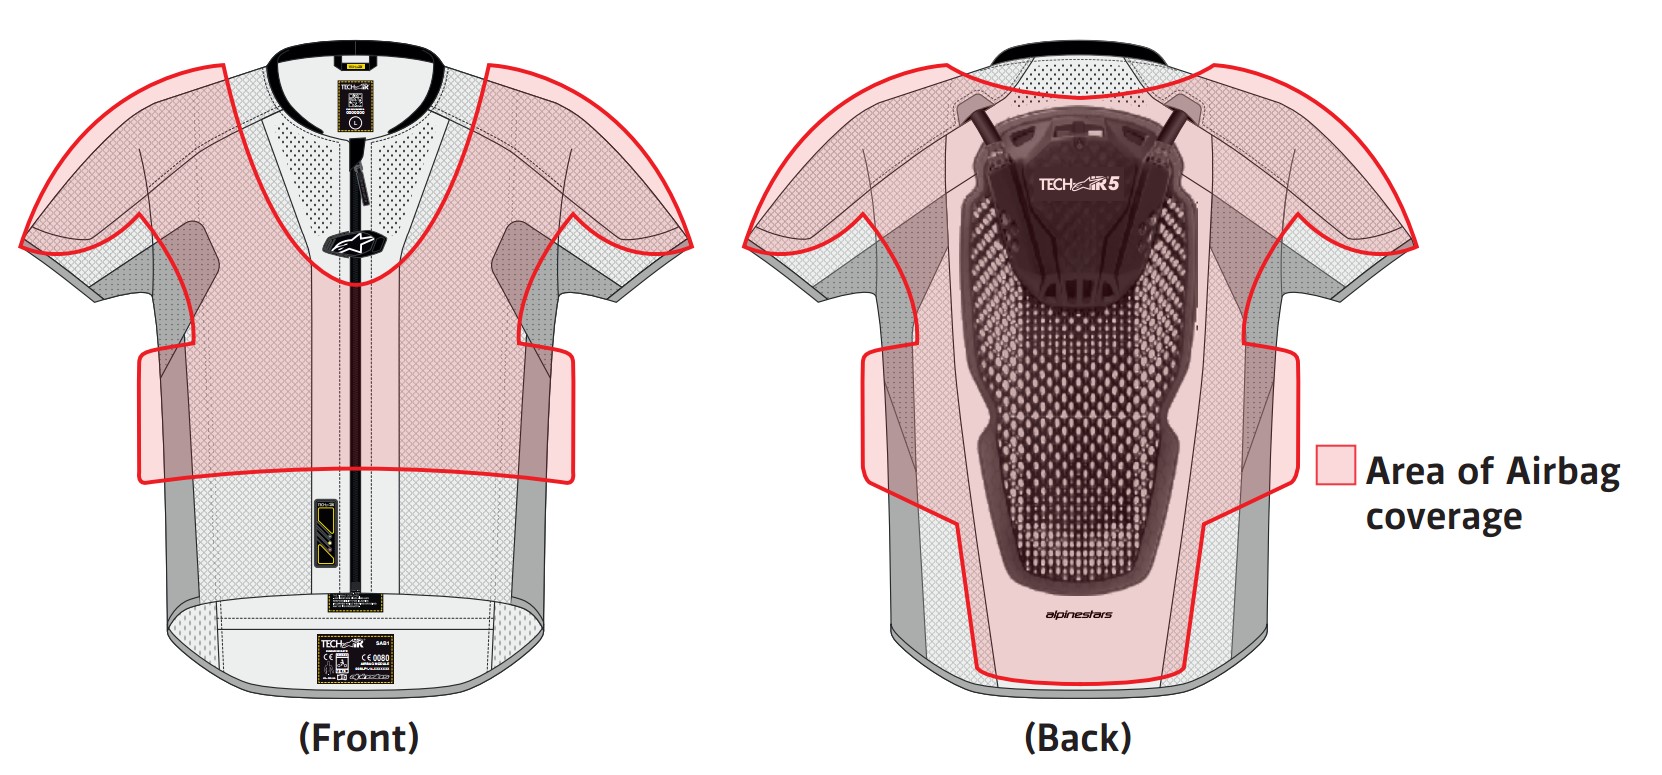 Airbag coverage area for Alpinestars TechAir 5